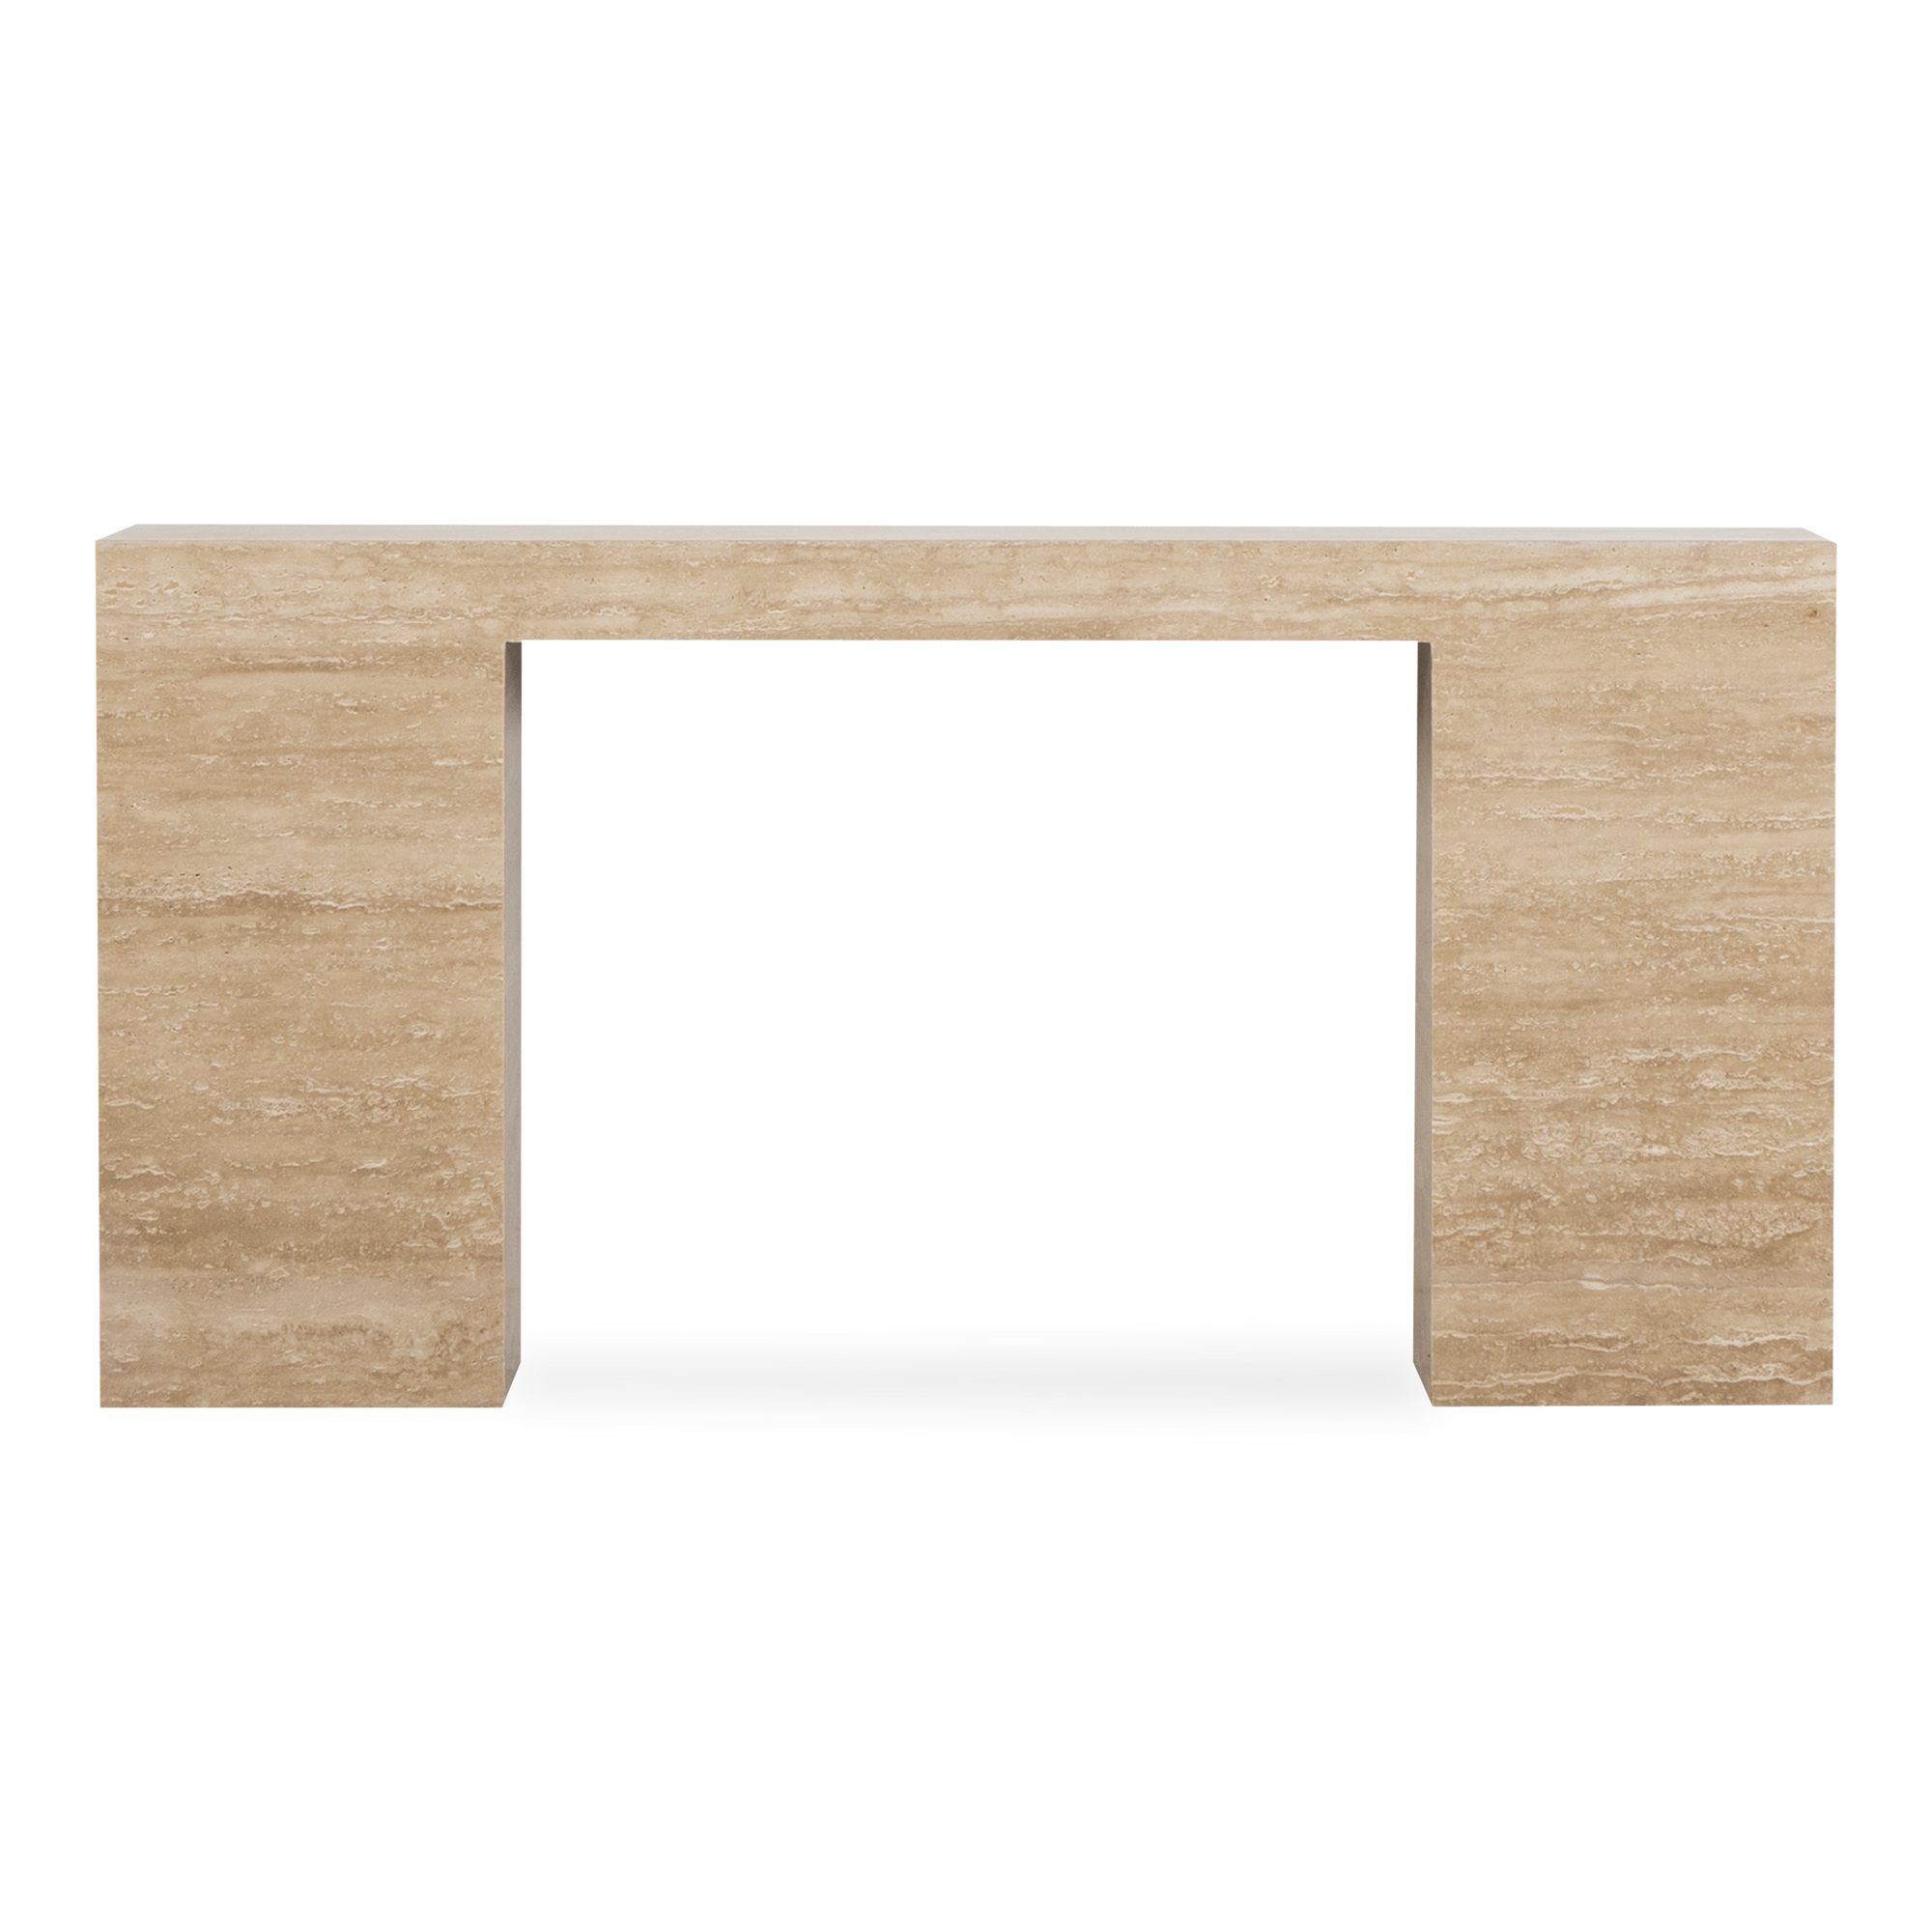 A nod to the modern brutalist designs of the 1970s from the likes of Rolf Middleboe, Gorm Lindum and Milo Baughman, the Duvall Console Table is characterized by its oversized block